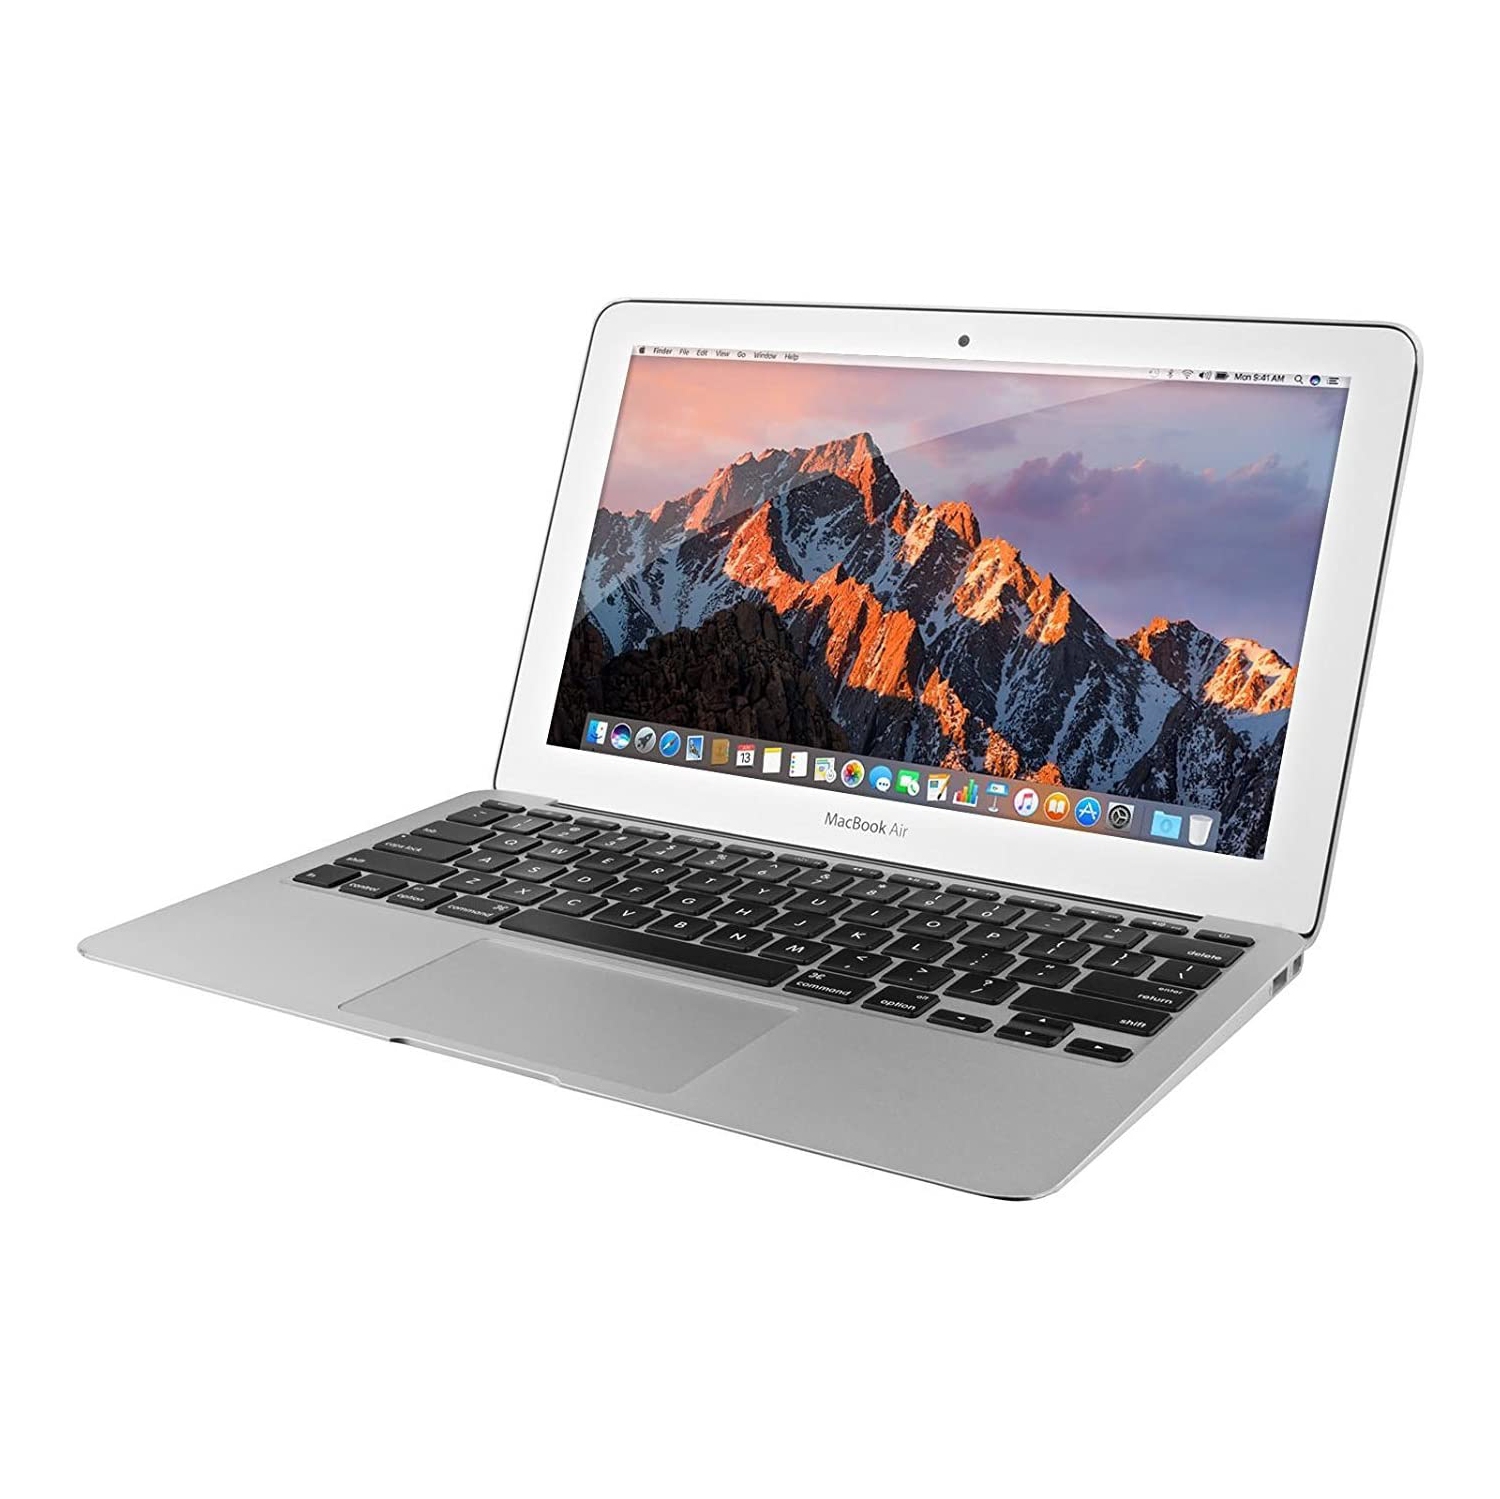 Refurbished (Excellent) - Apple Macbook Air 11 2015 2.4GHz/i5/4GB/128GB SSD Certified Refurbished with Warranty